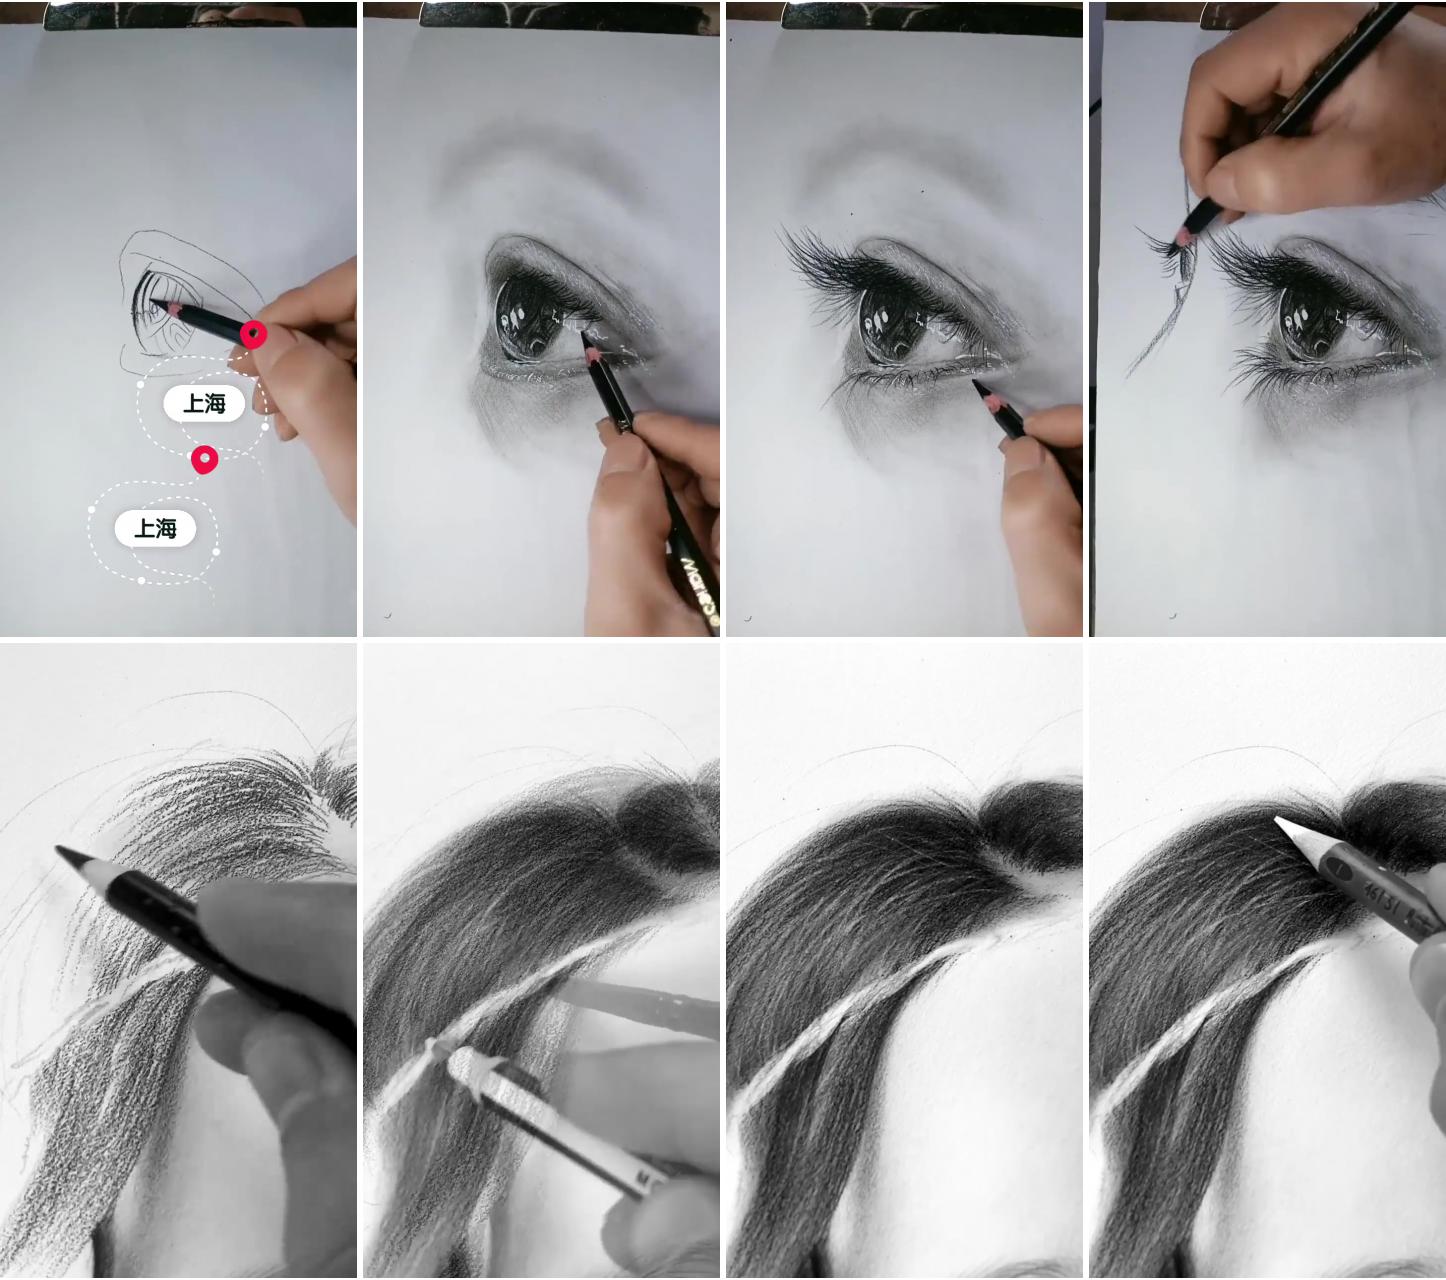 Charcoal realistic hair drawing techniques by artbyhayan | art sketches pencil